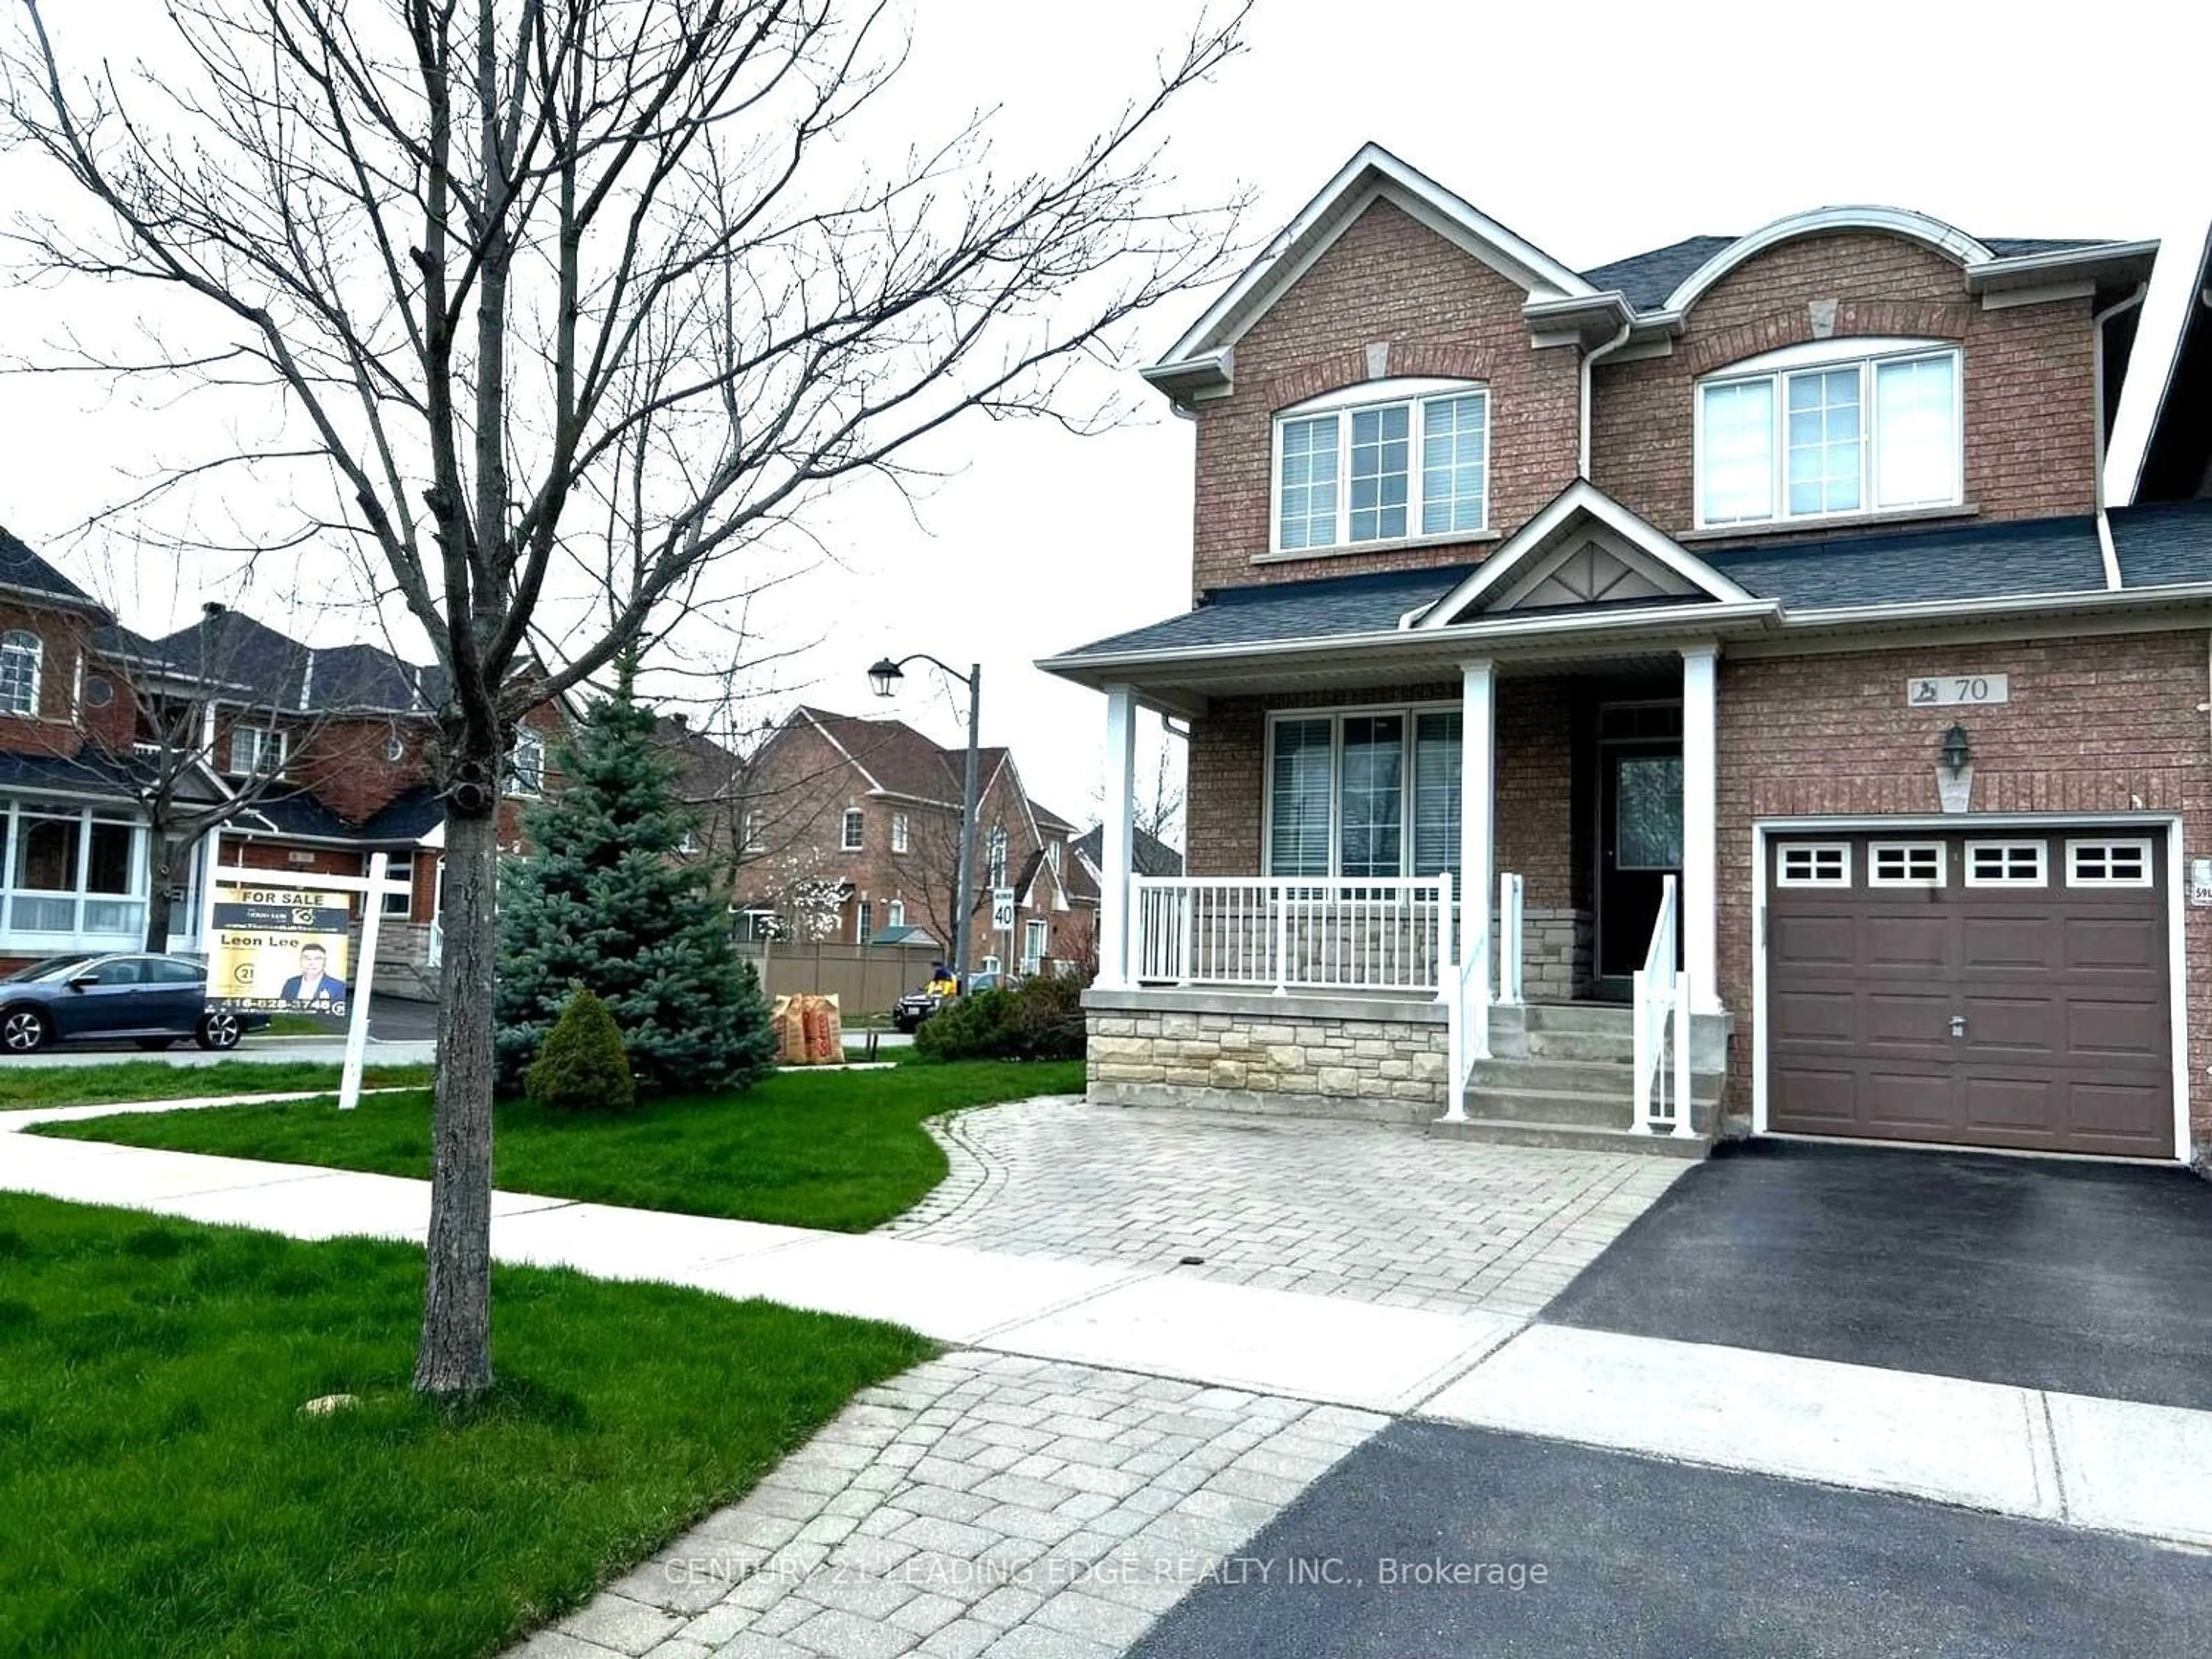 Home with brick exterior material for 70 Tidewater St, Markham Ontario L6E 2G8